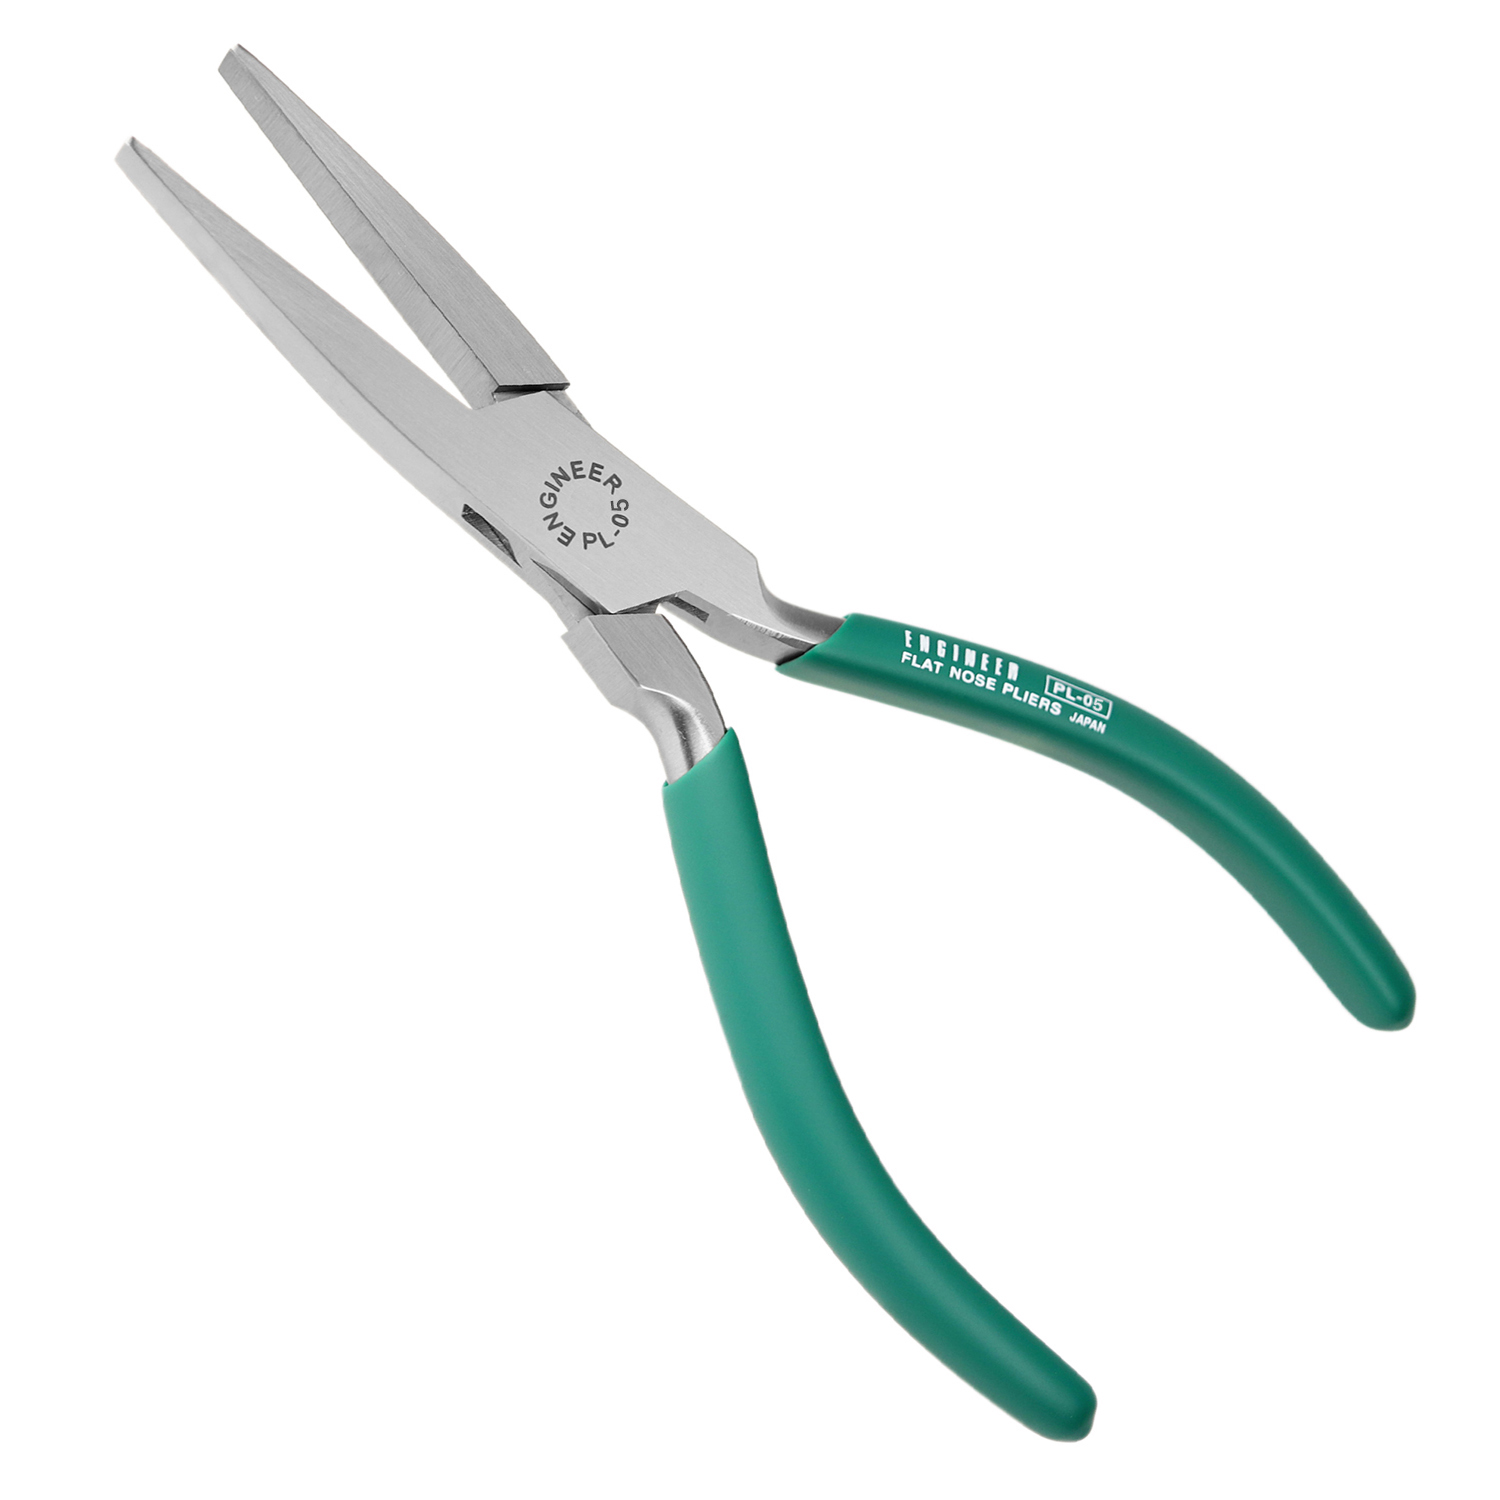 Pliers - Flat-Nose Lead Nippers, Stainless Steel, PL-06